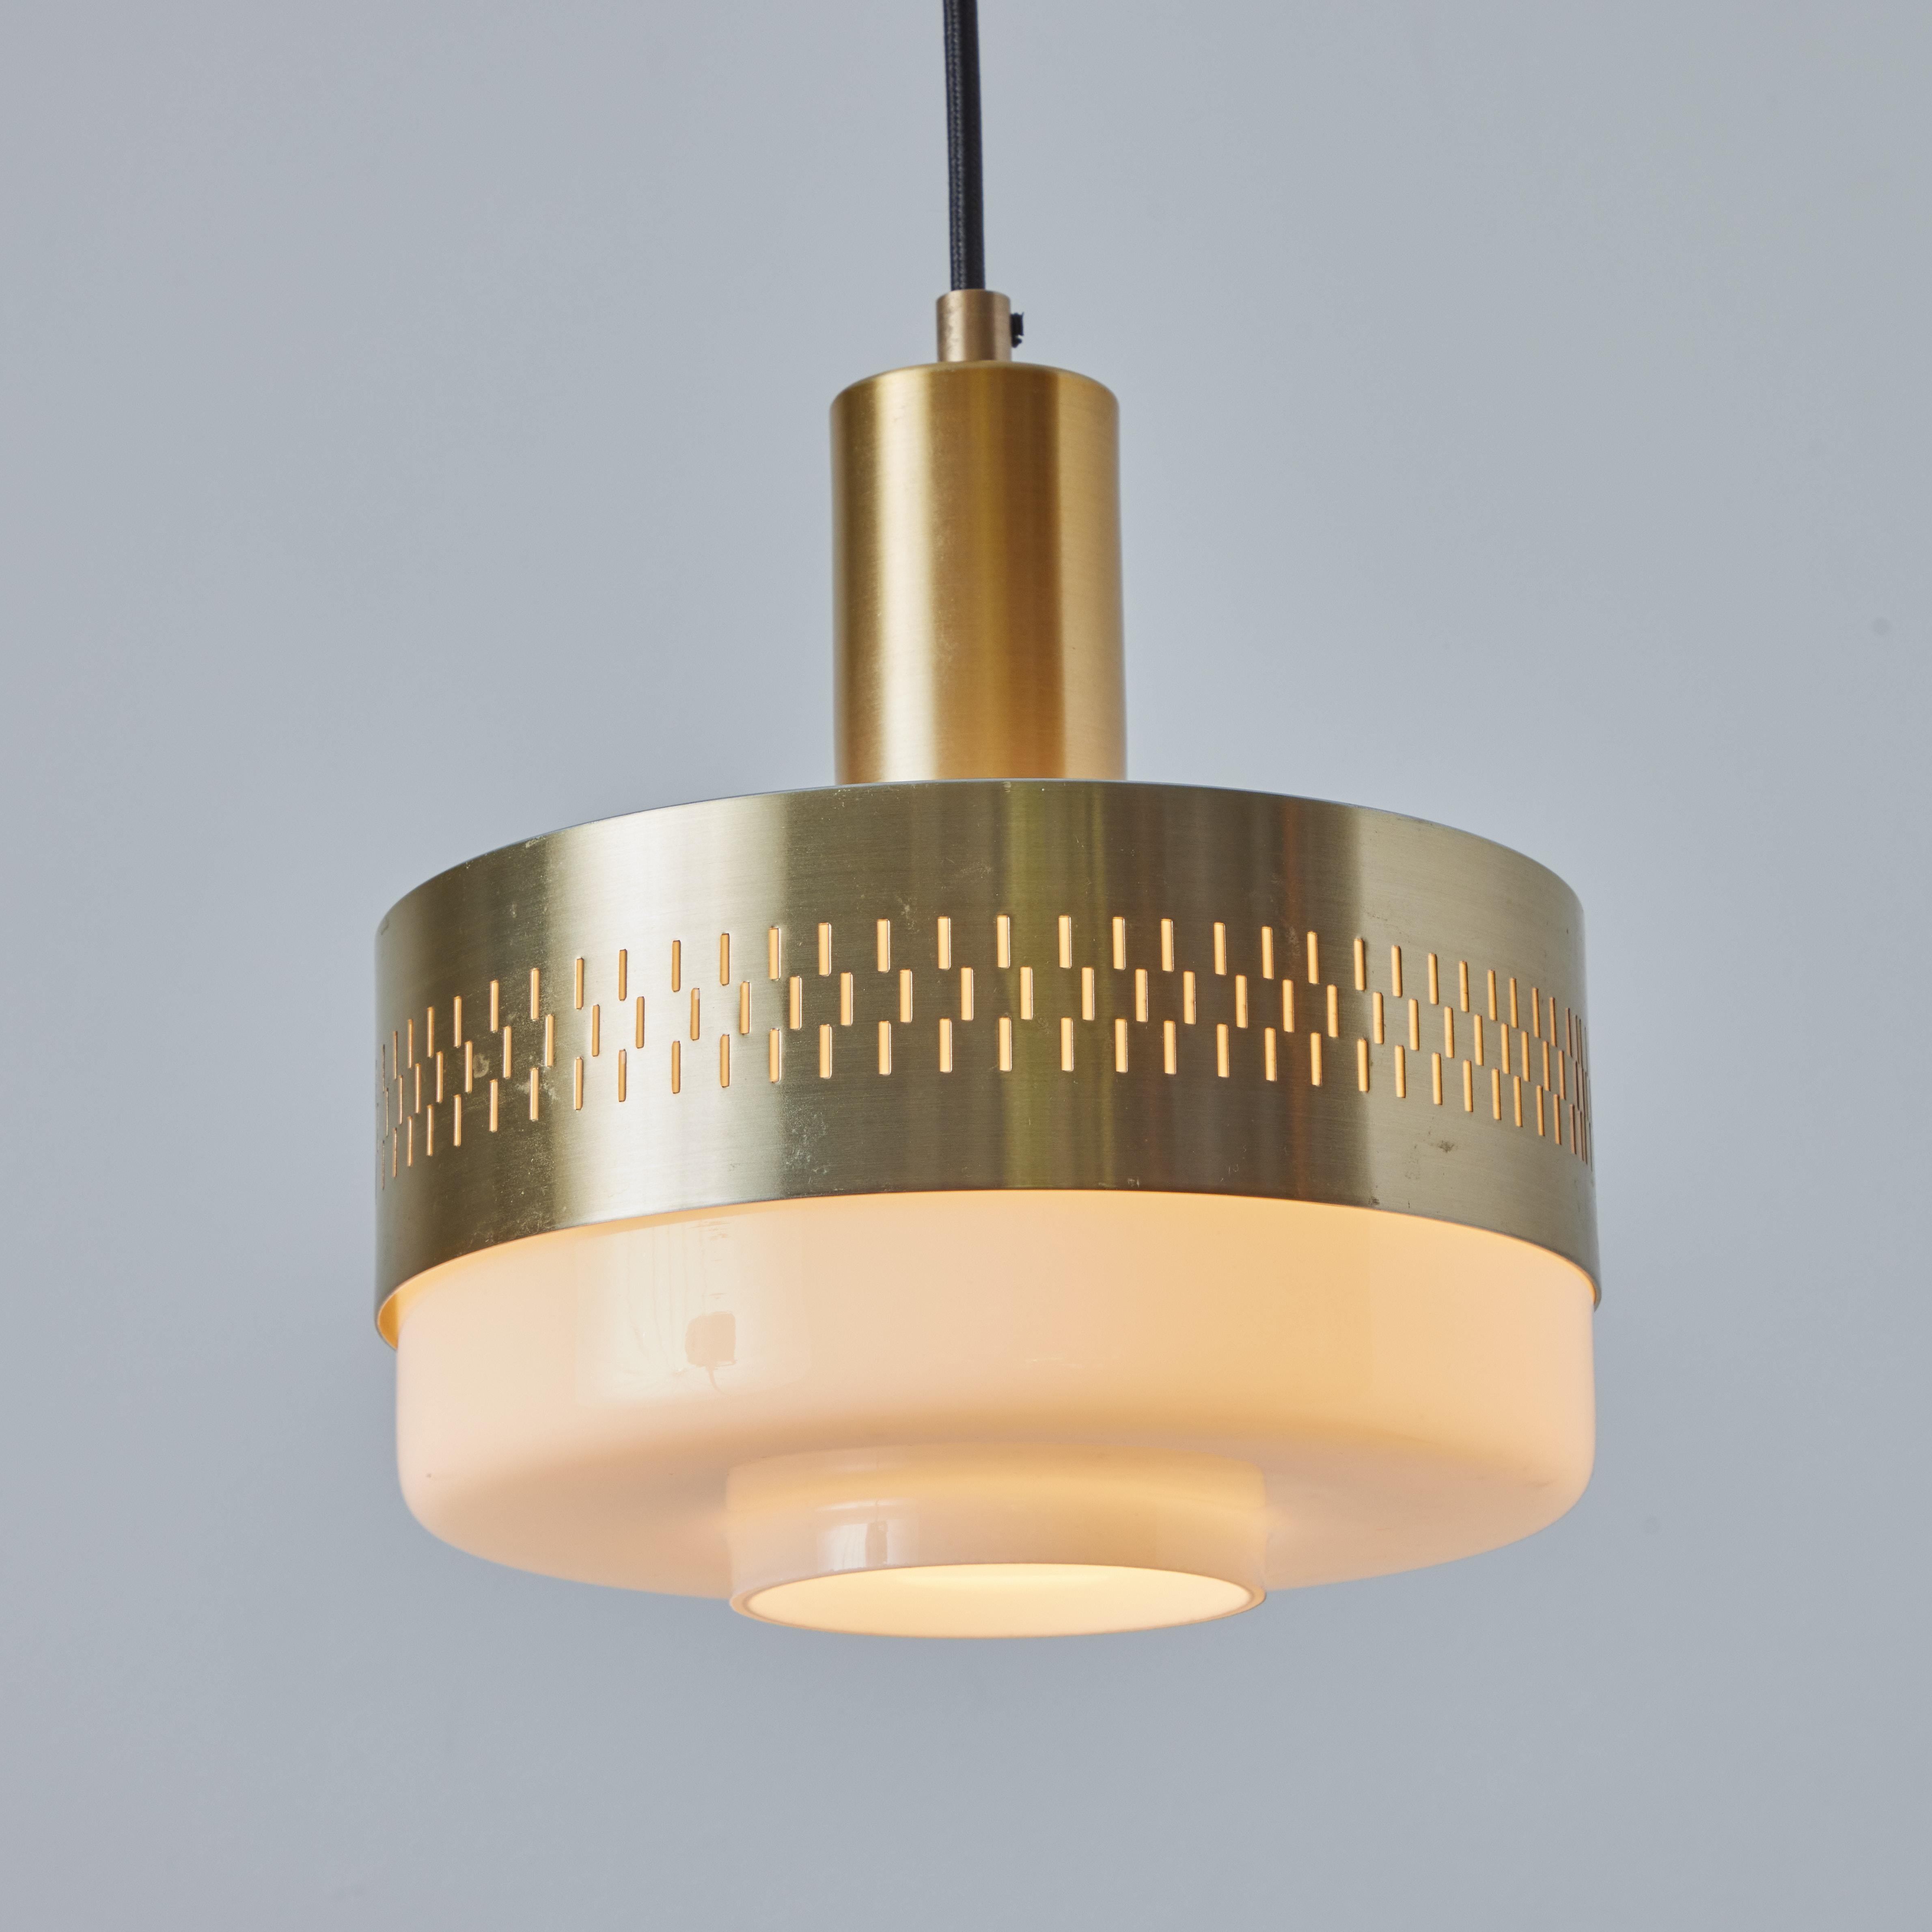 1960s Perforated Brass & Glass Pendant Attributed to Hans-Agne Jakobsson In Good Condition For Sale In Glendale, CA